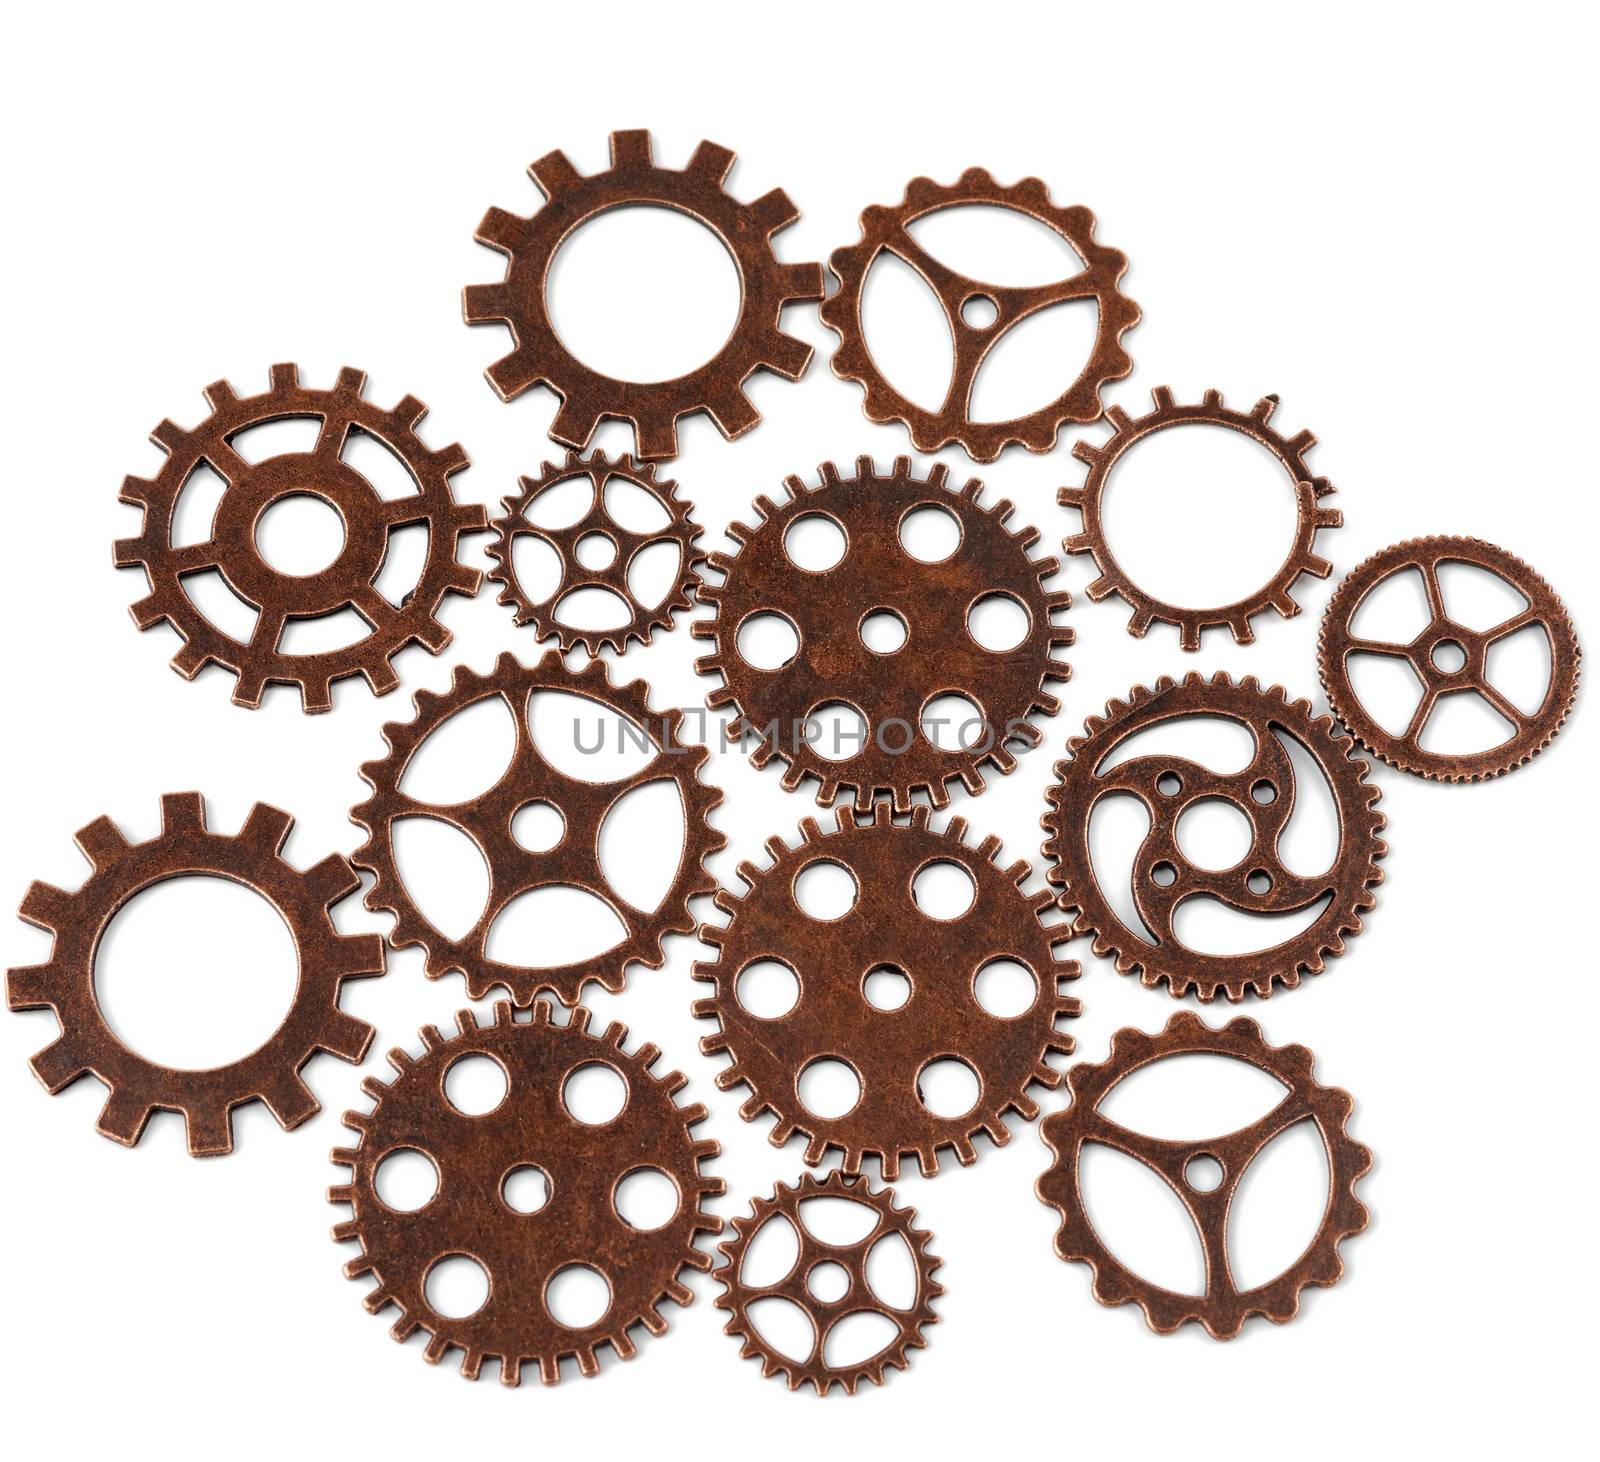 copper various cogs isolated on white background, close up